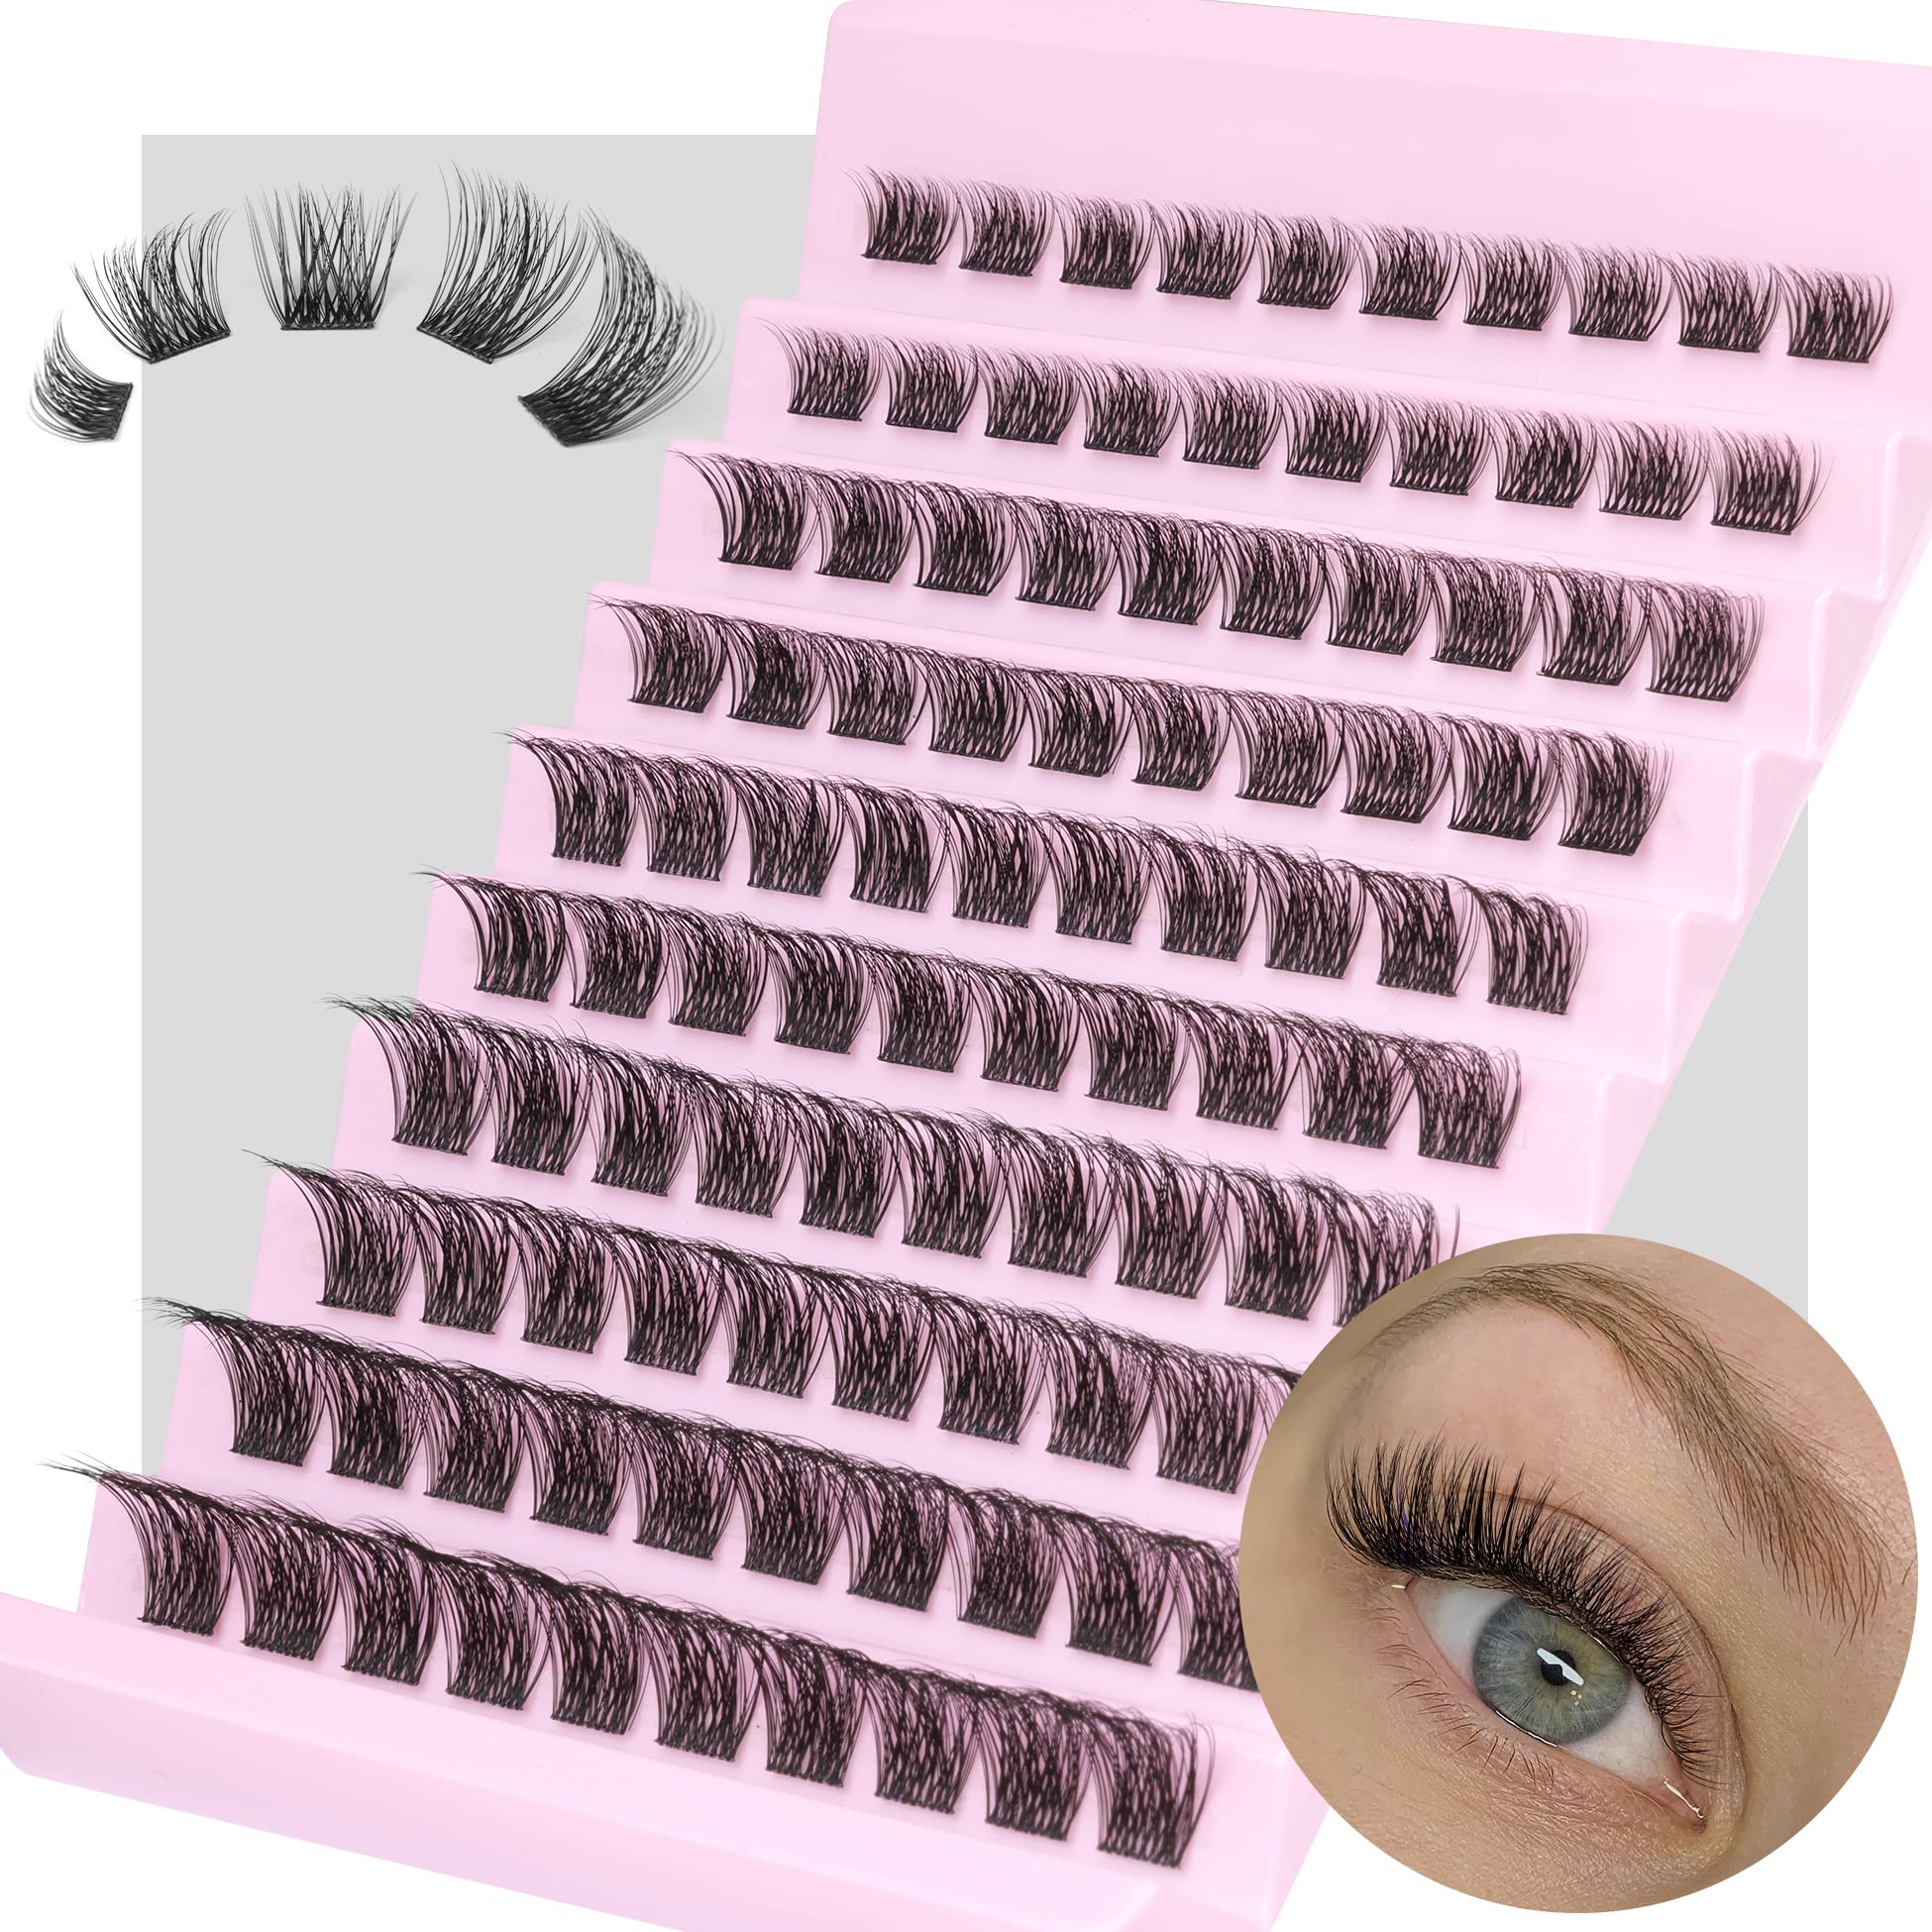 Choosing the Right Lash Sets for Every Occasion